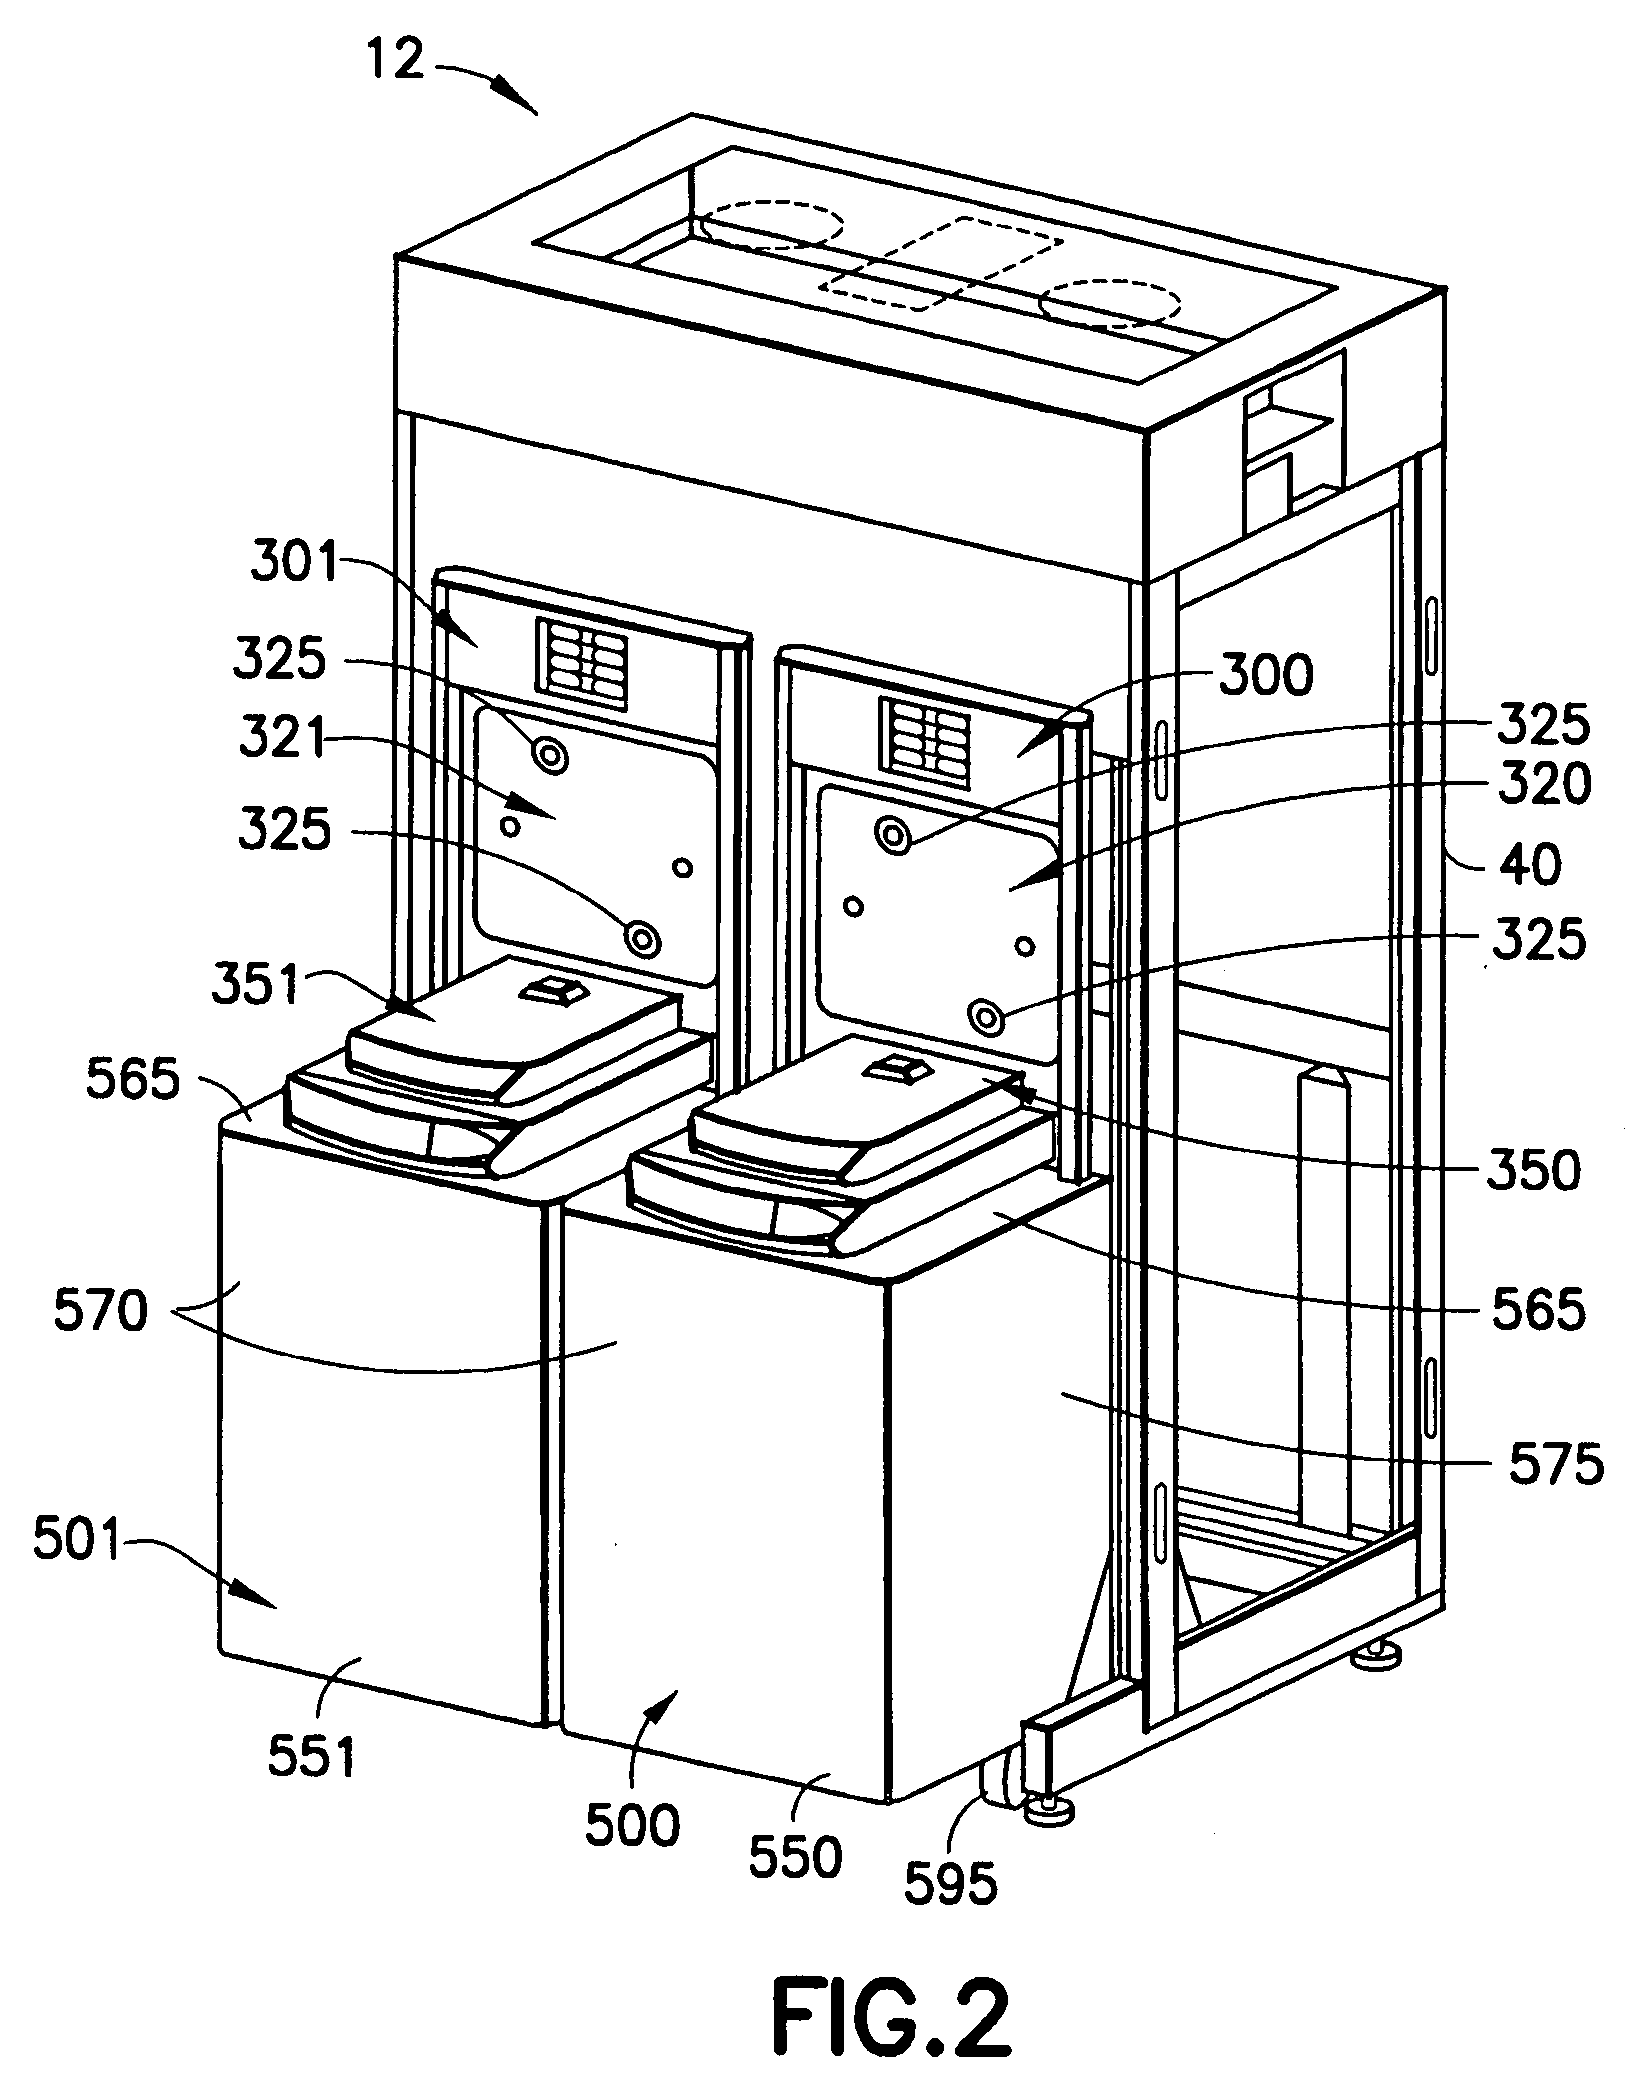 Equipment storage for substrate processing apparatus